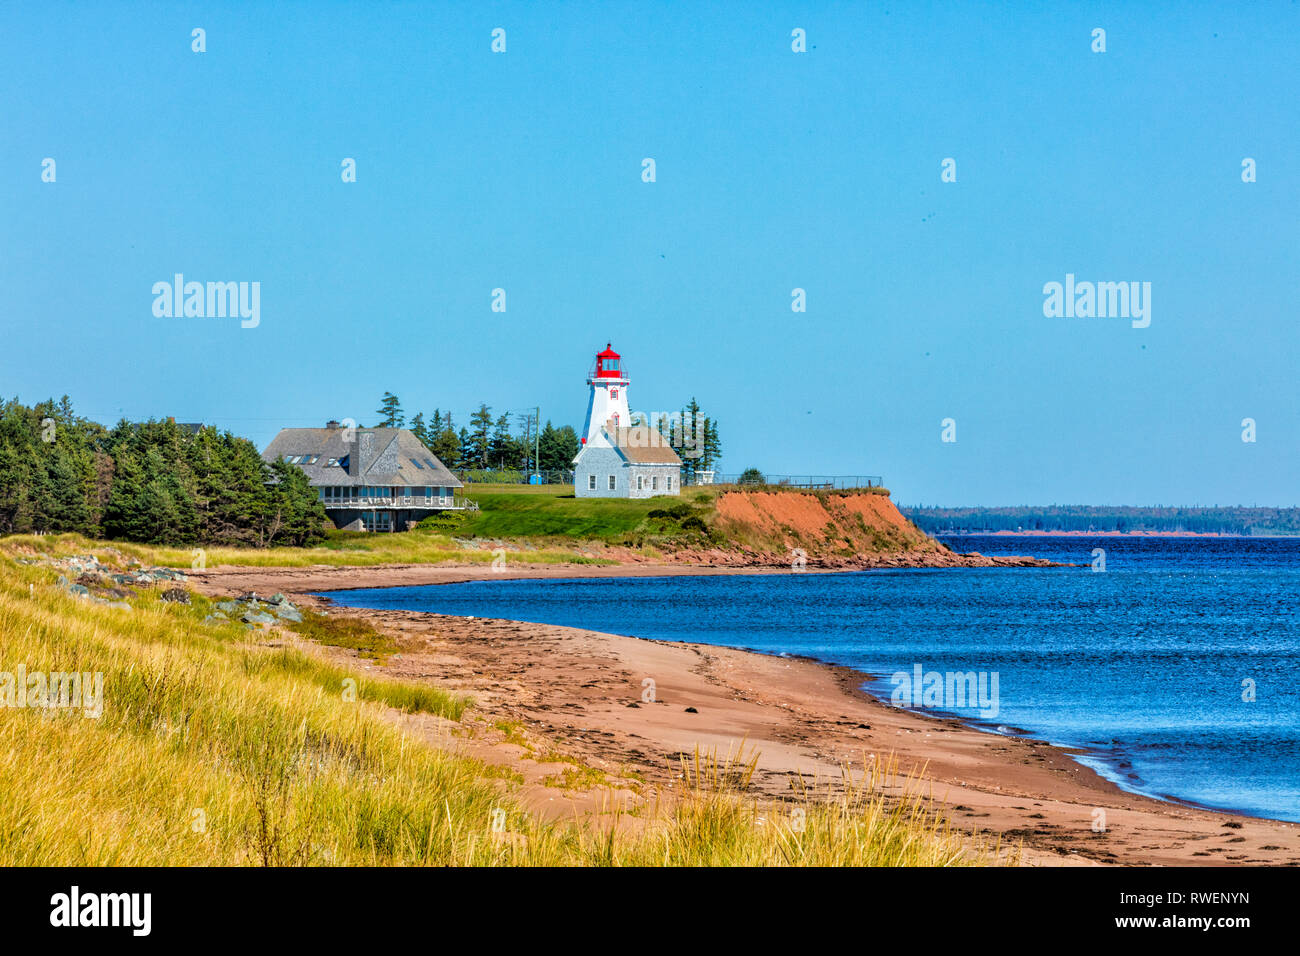 Phare, île Panmure, Prince Edward Island, Canada Banque D'Images